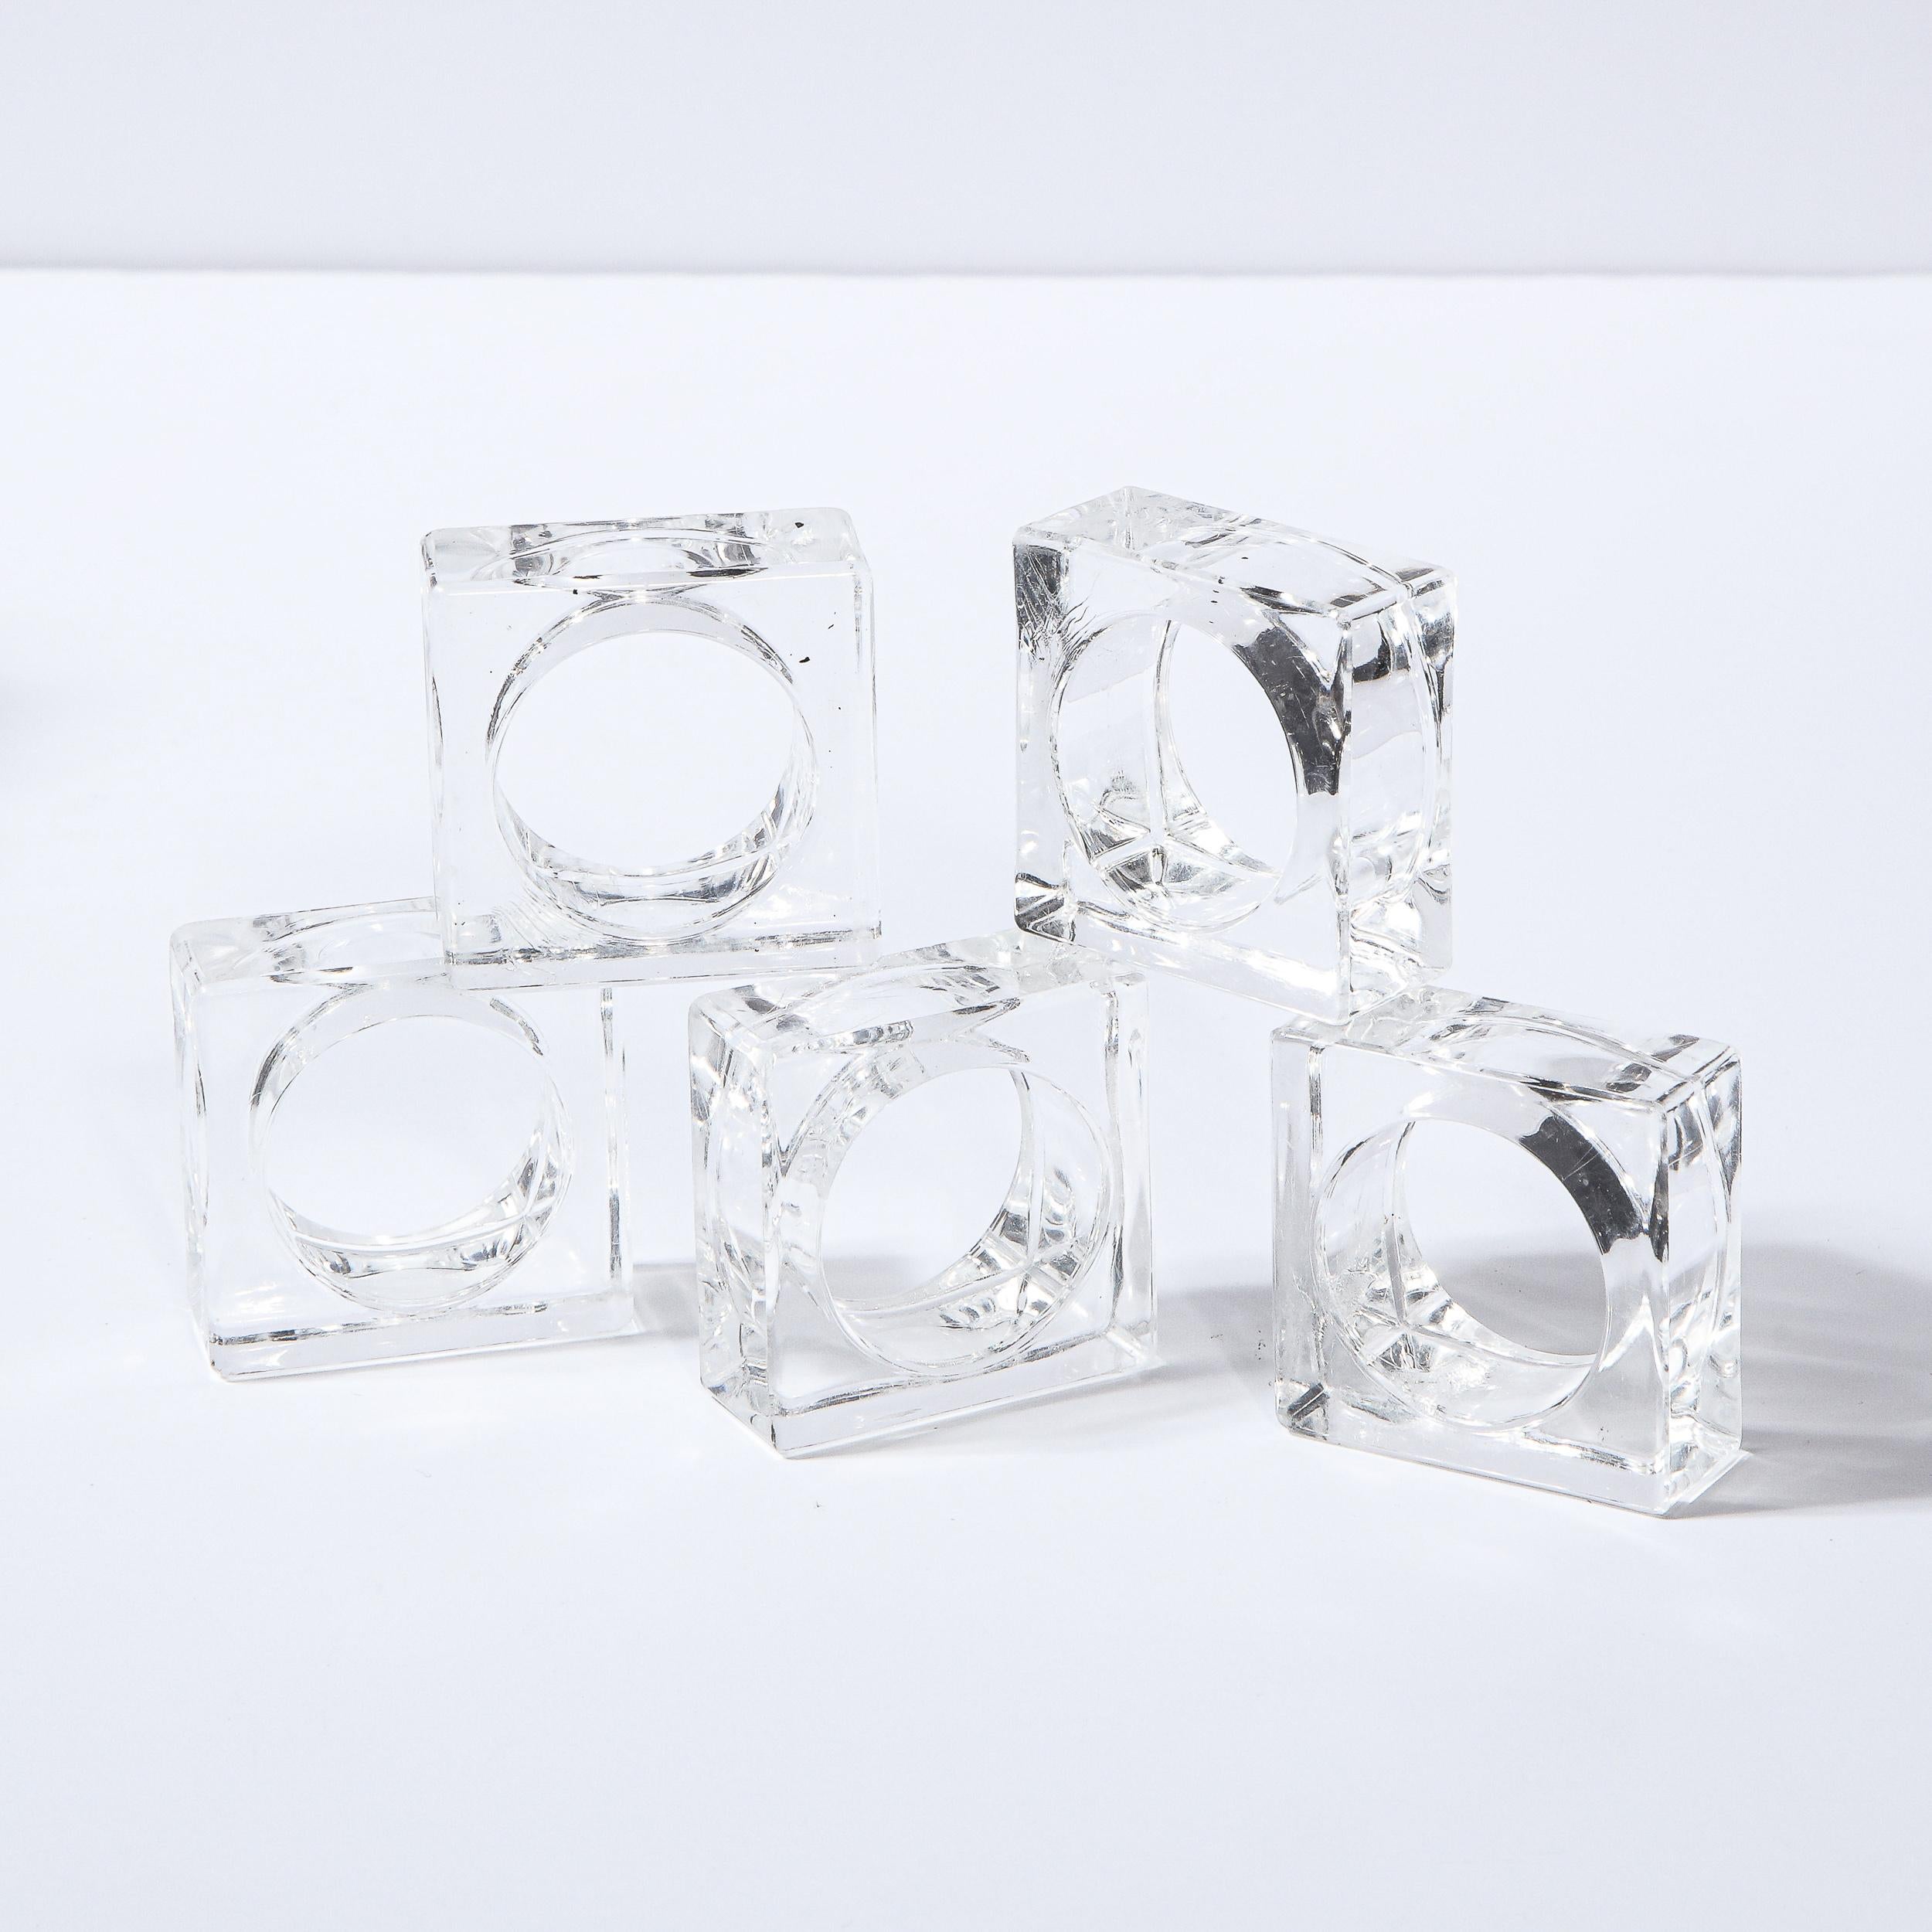 Late 20th Century Set of 18 Mid-Century Modern Square Translucent Lucite Napkin Holders For Sale